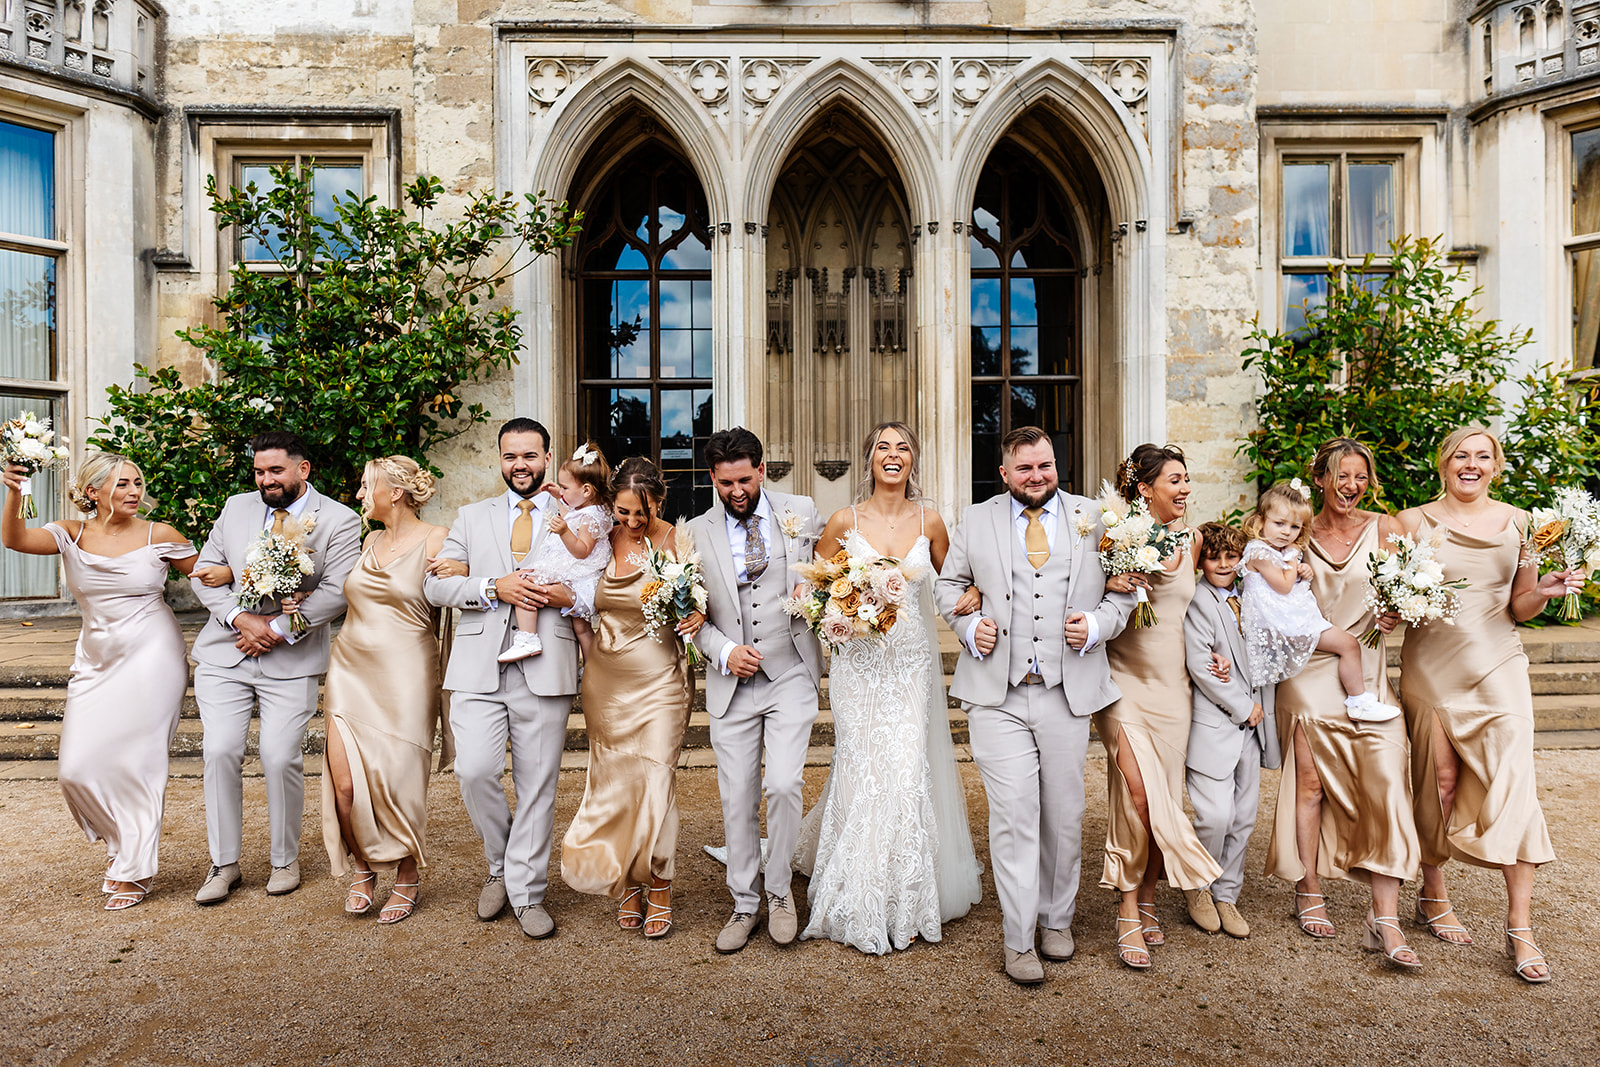 Bride & Groom walking down the steps of Ashridge House, groomsmen to the left and bridesmaids to the right, all linking arms and smiling 